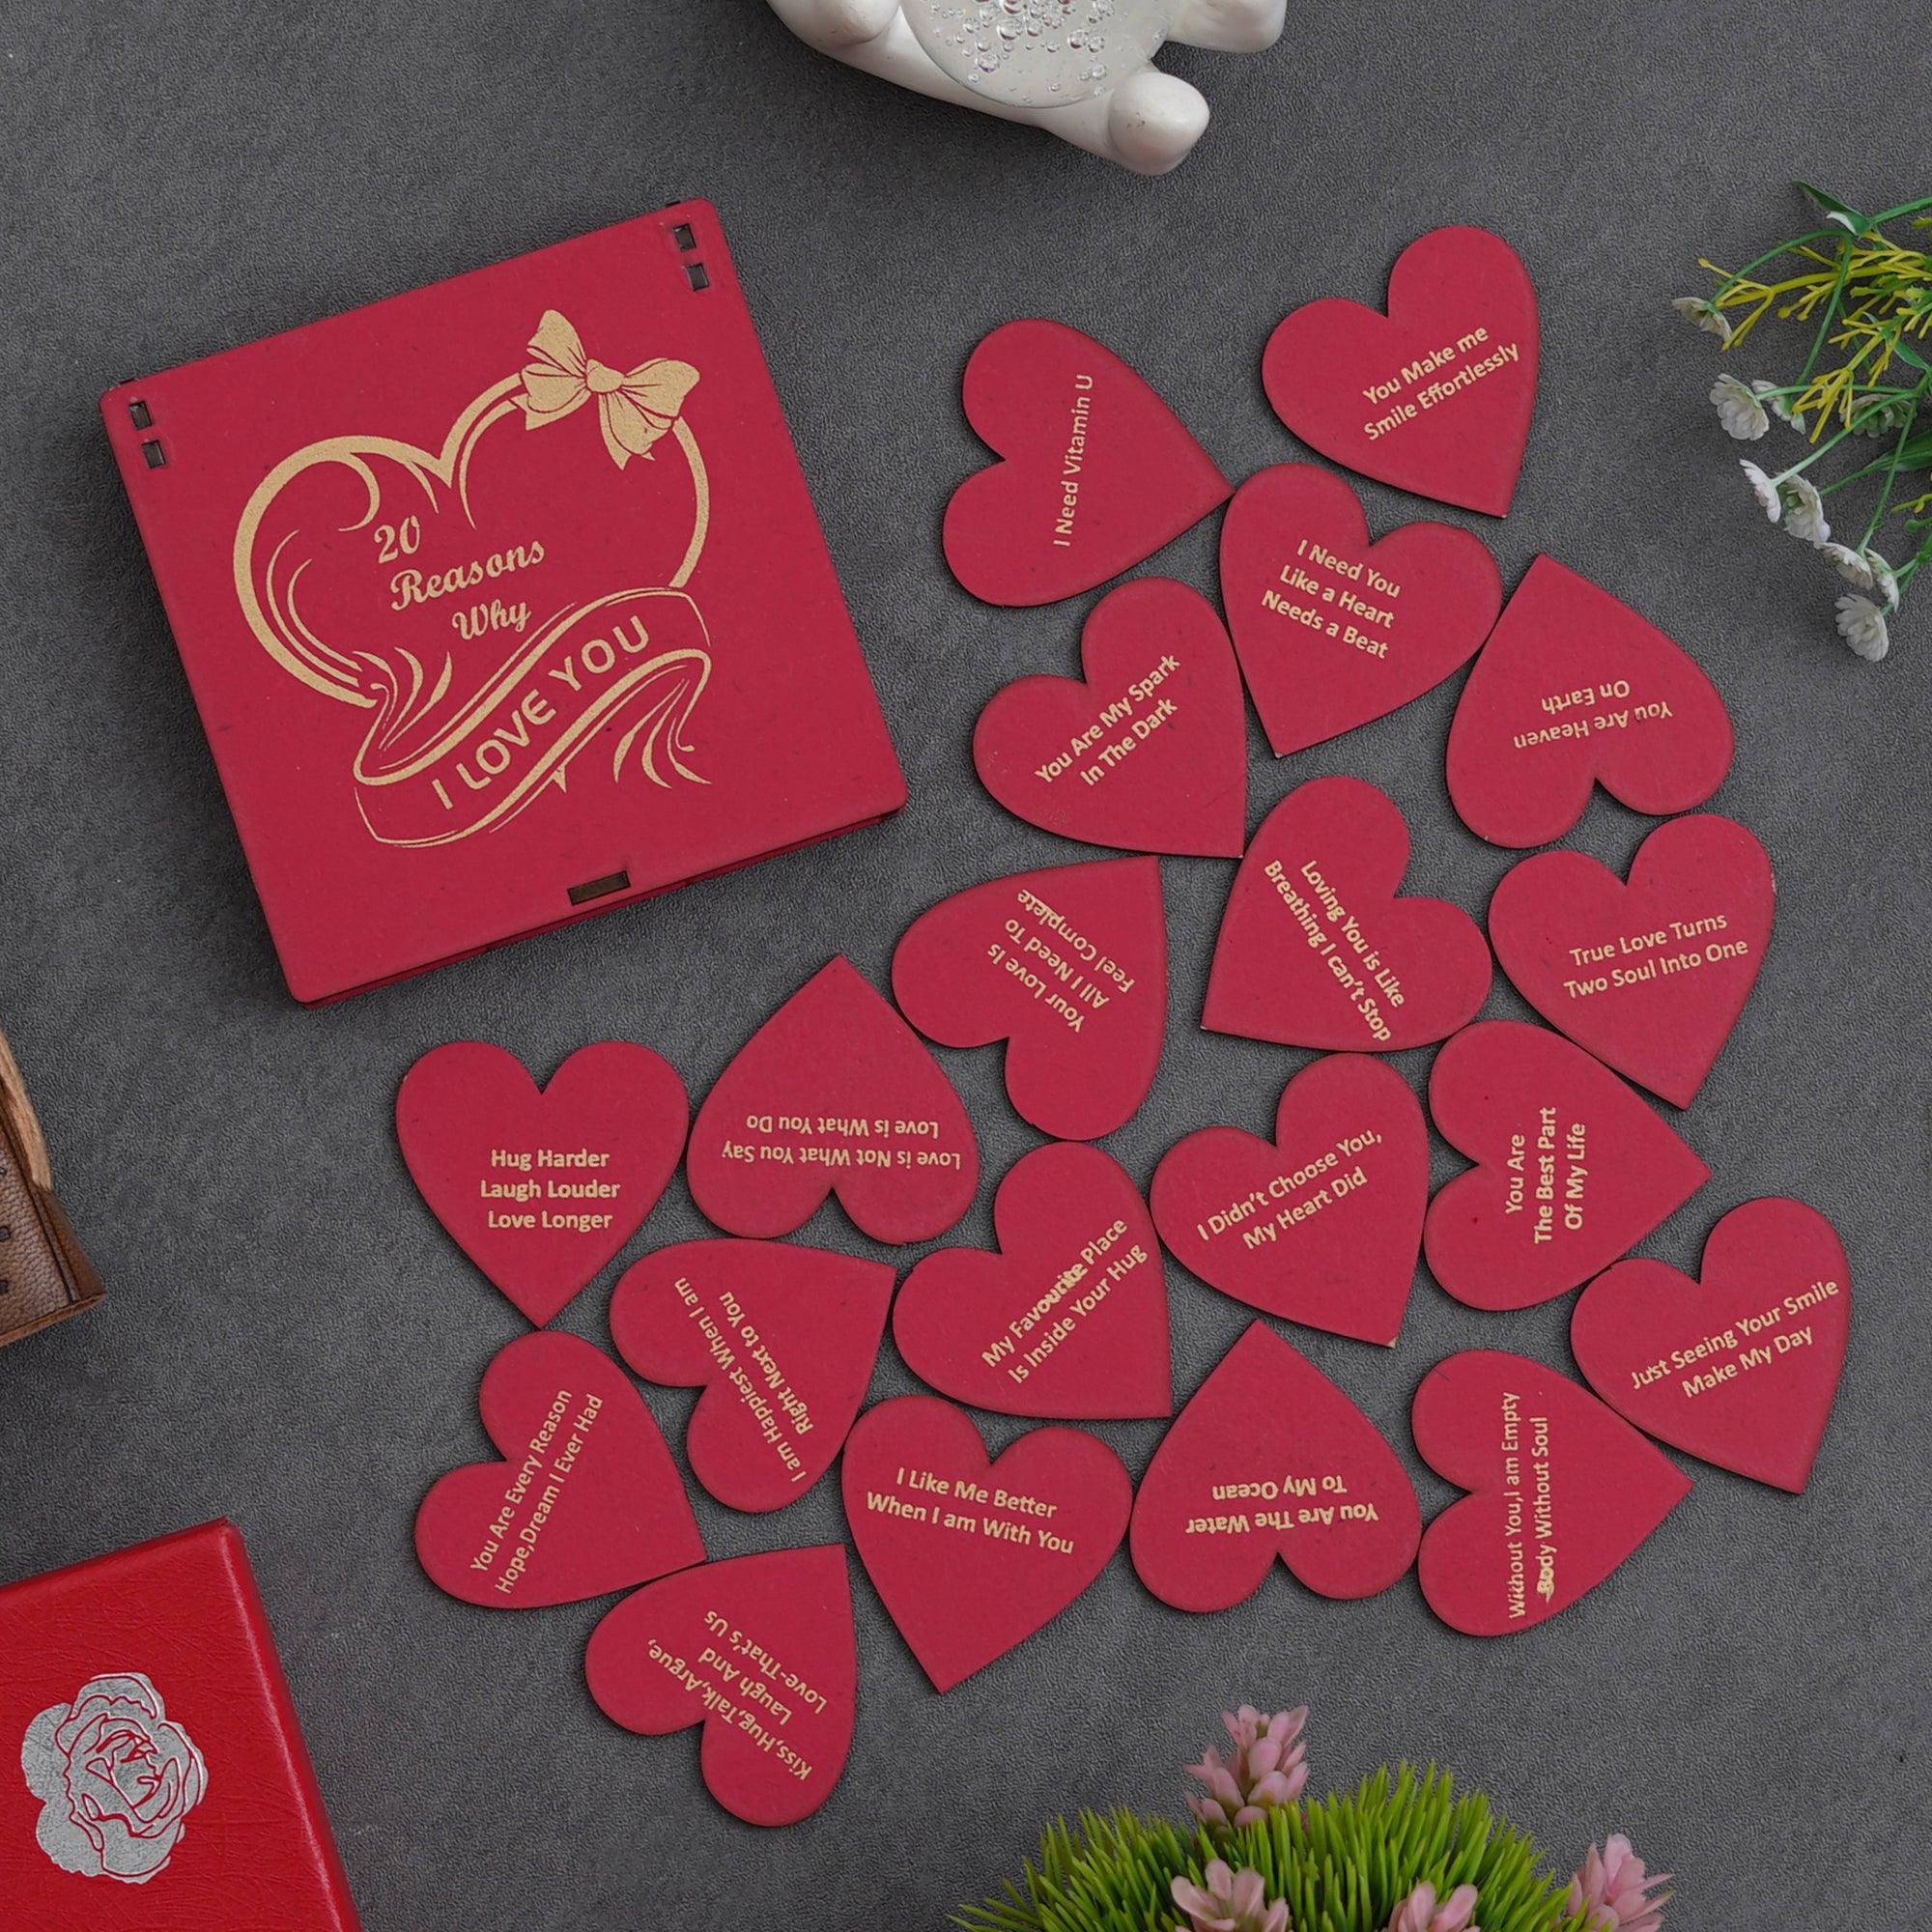 Valentine Combo of Set of 8 Love Post Cards Gift Cards Set, "20 Reasons Why I Love You" Printed on Little Red Hearts Decorative Wooden Gift Set Box, Red Roses Bouquet and White, Red Teddy Bear Valentine's Rectangle Shaped Gift Box 3